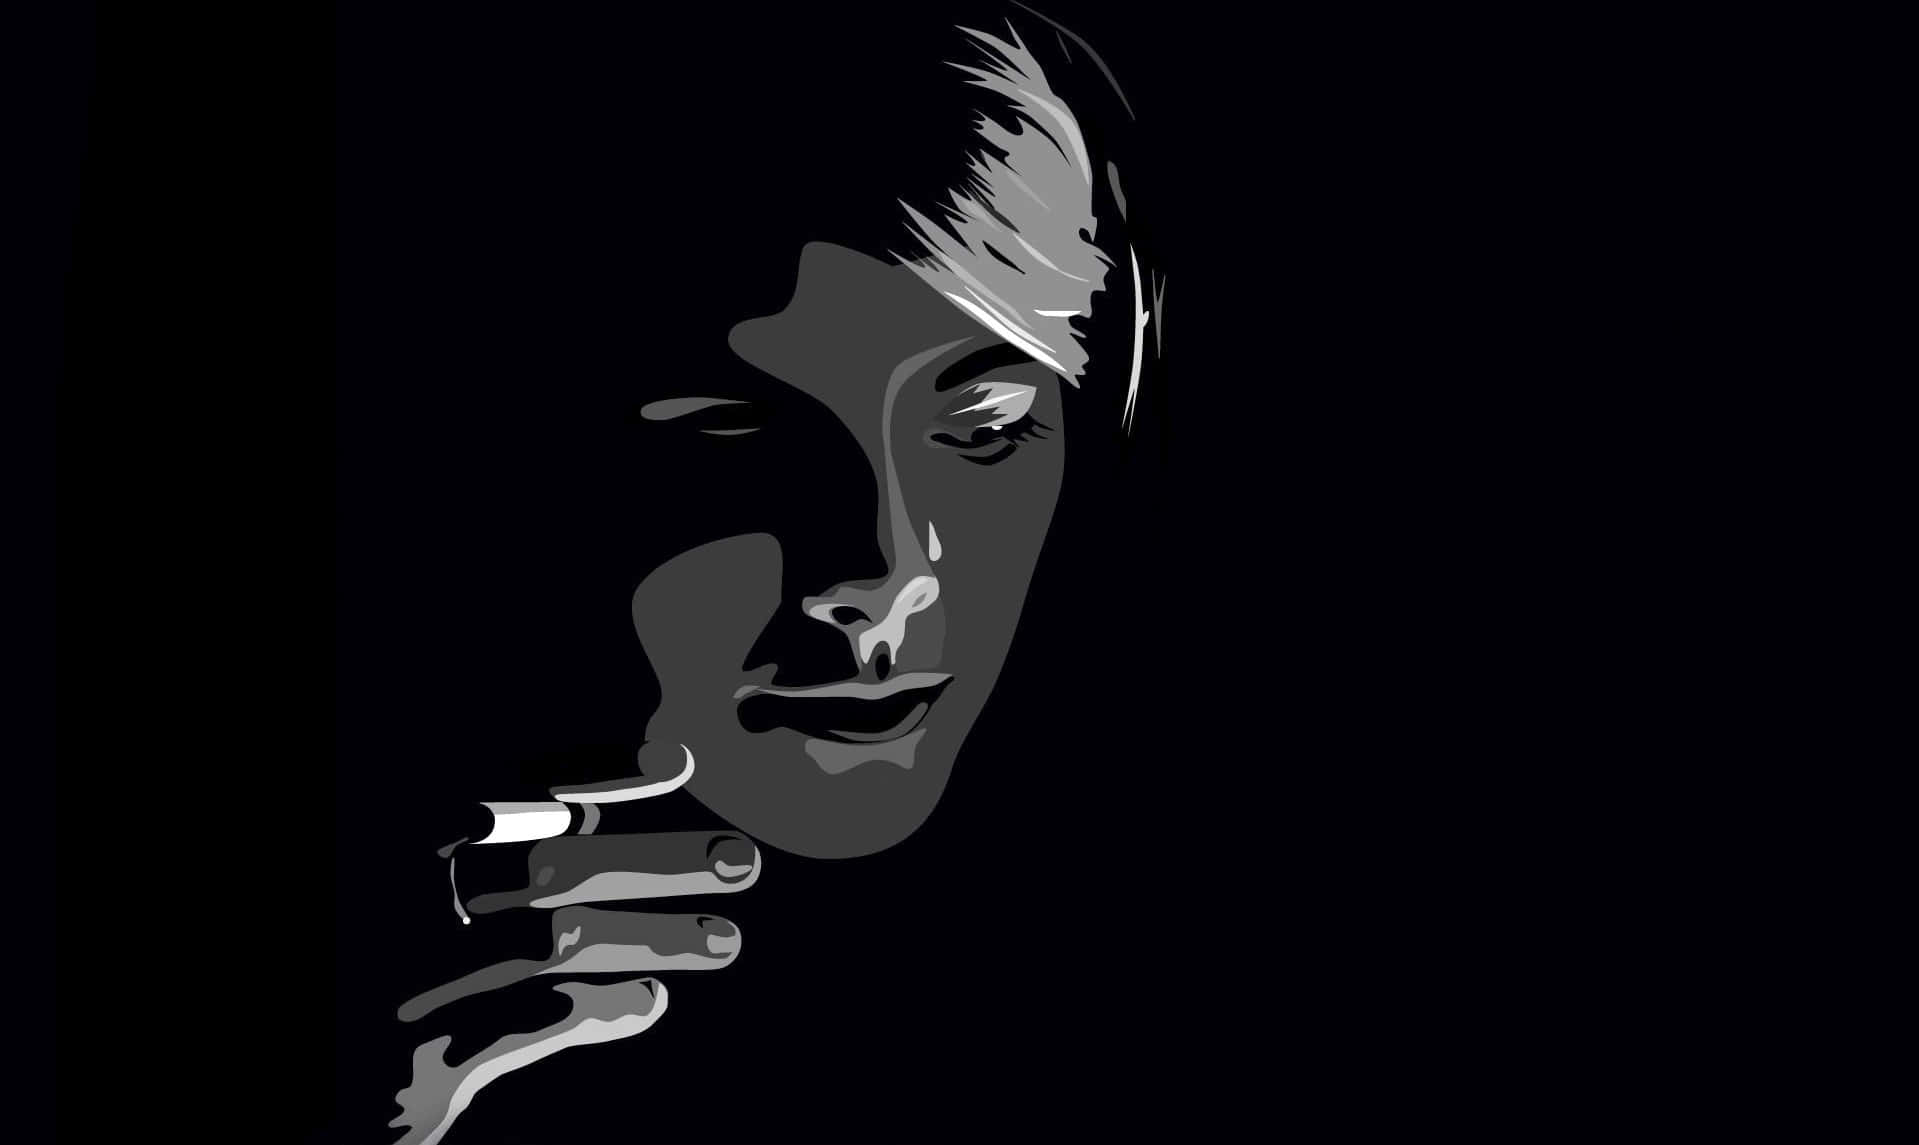 Black Graphic Design Art Crying With Cigarette